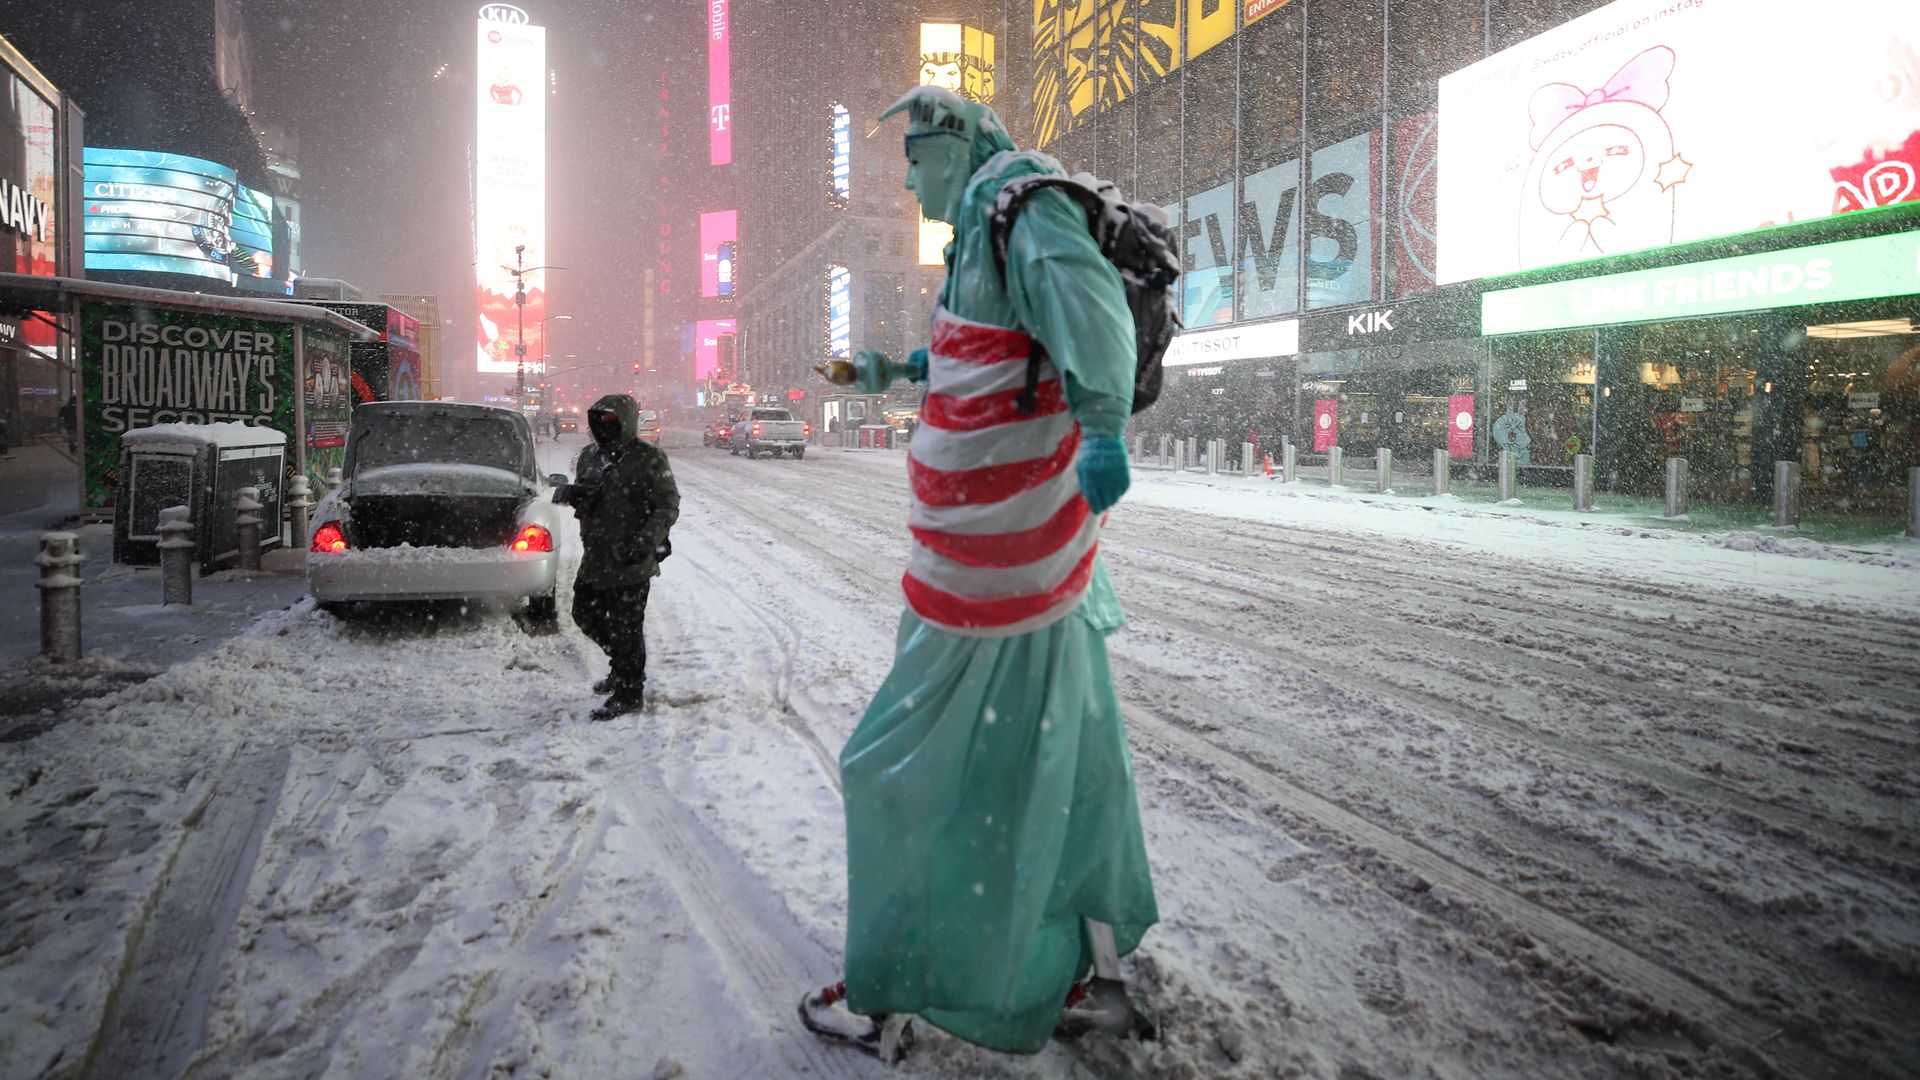 Snowfall view at the Times Square in New York City, United States on December 16